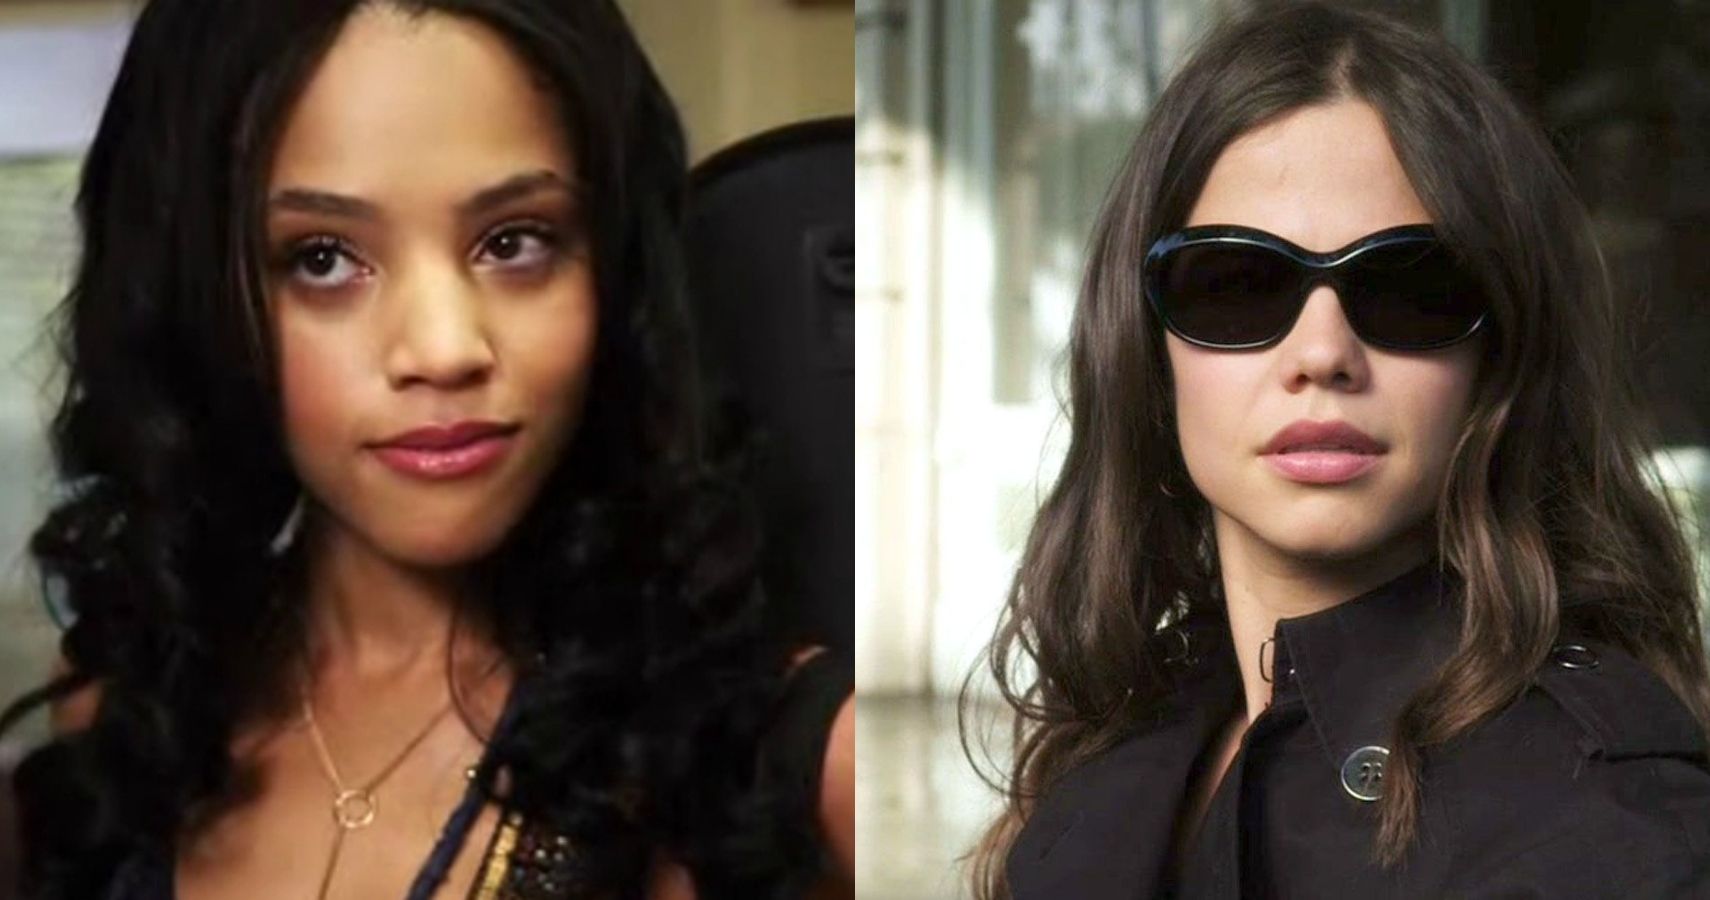 Pretty Little Liars 5 Side Characters Everyone Likes (& 5 Everyone Hates)